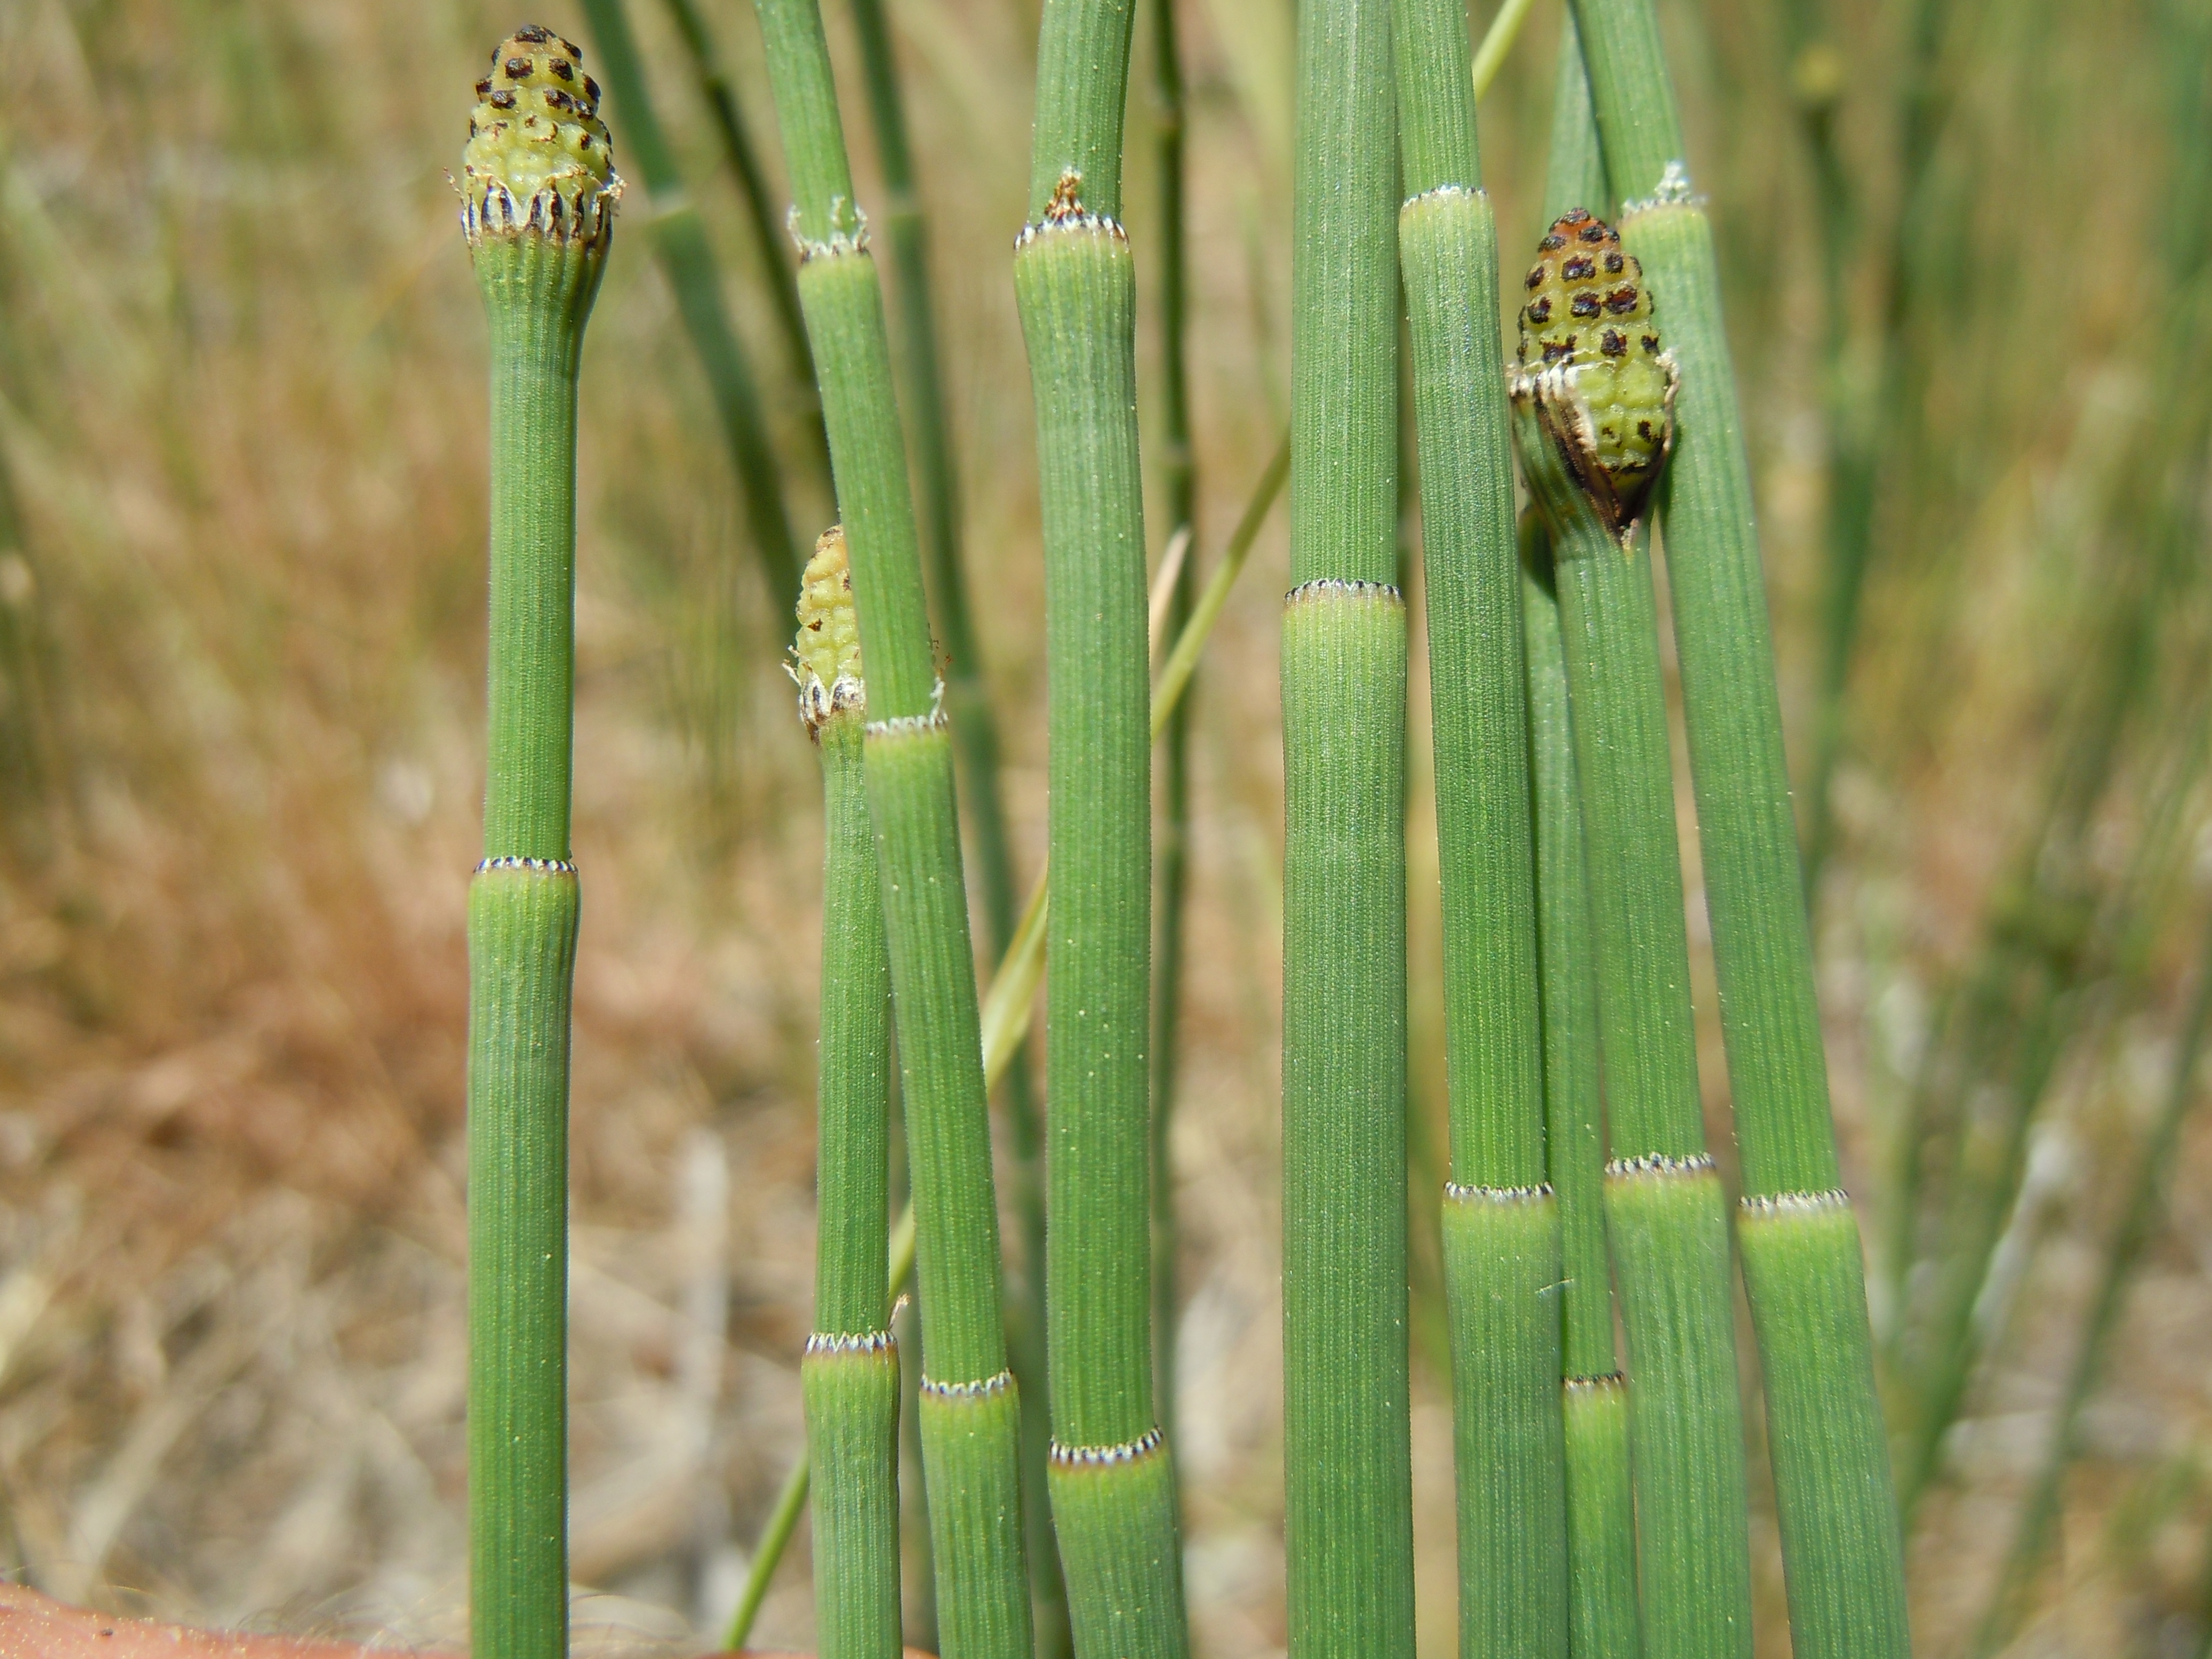 A grouping of stems with jointed stems and cones clearly visible